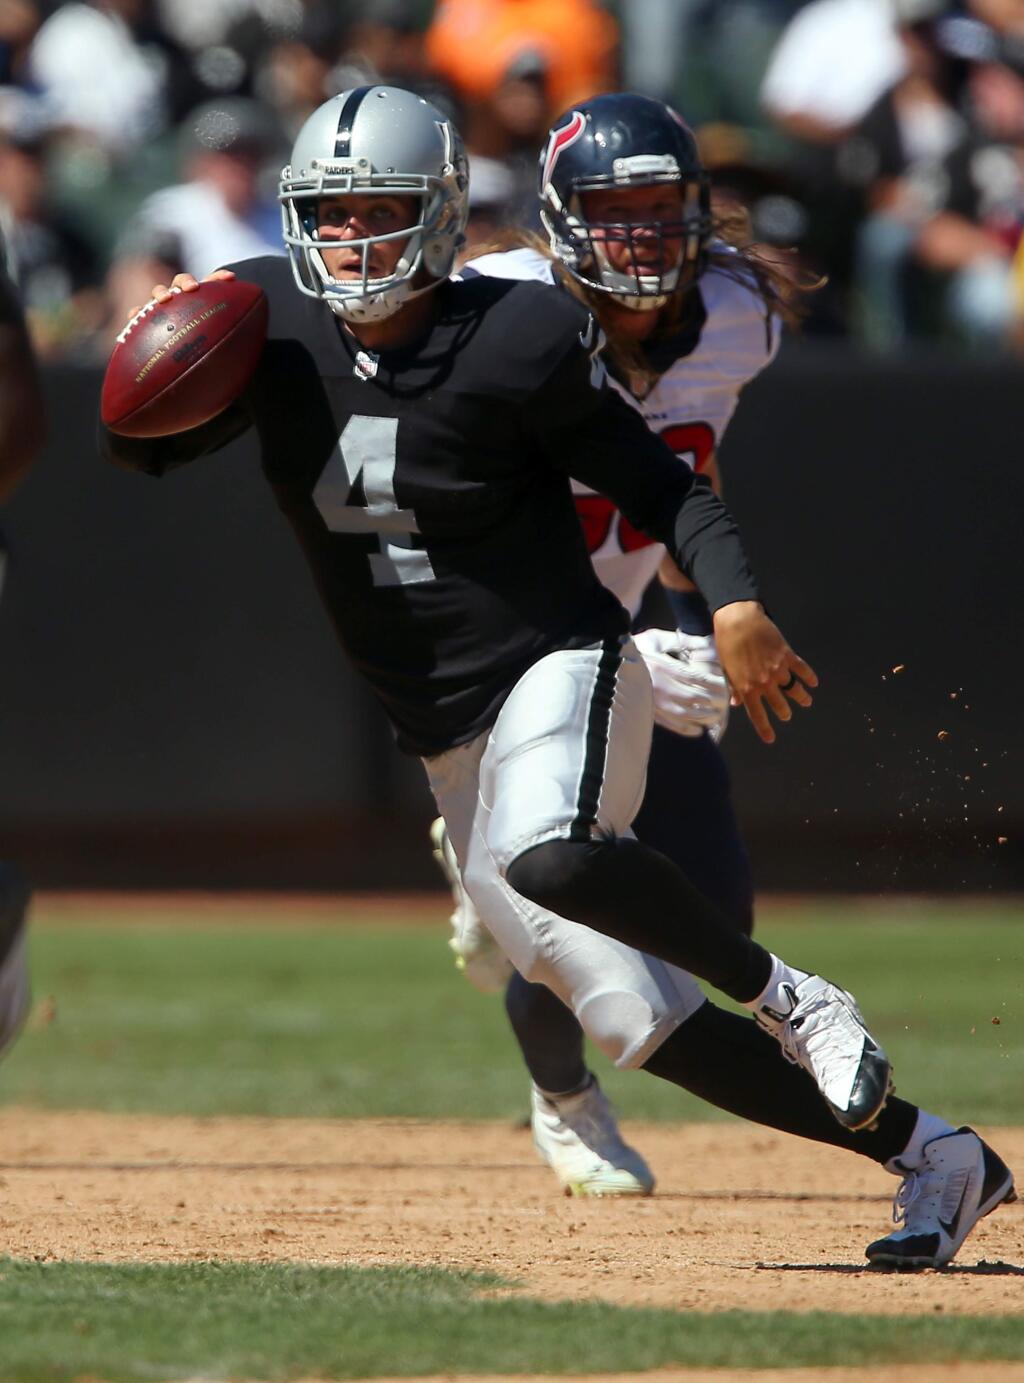 Oakland Raiders quarterback Derek Carr scrambles against the Houston Texans during their game in Oakland on Sunday, September 14, 2014. The Texans defeated the Raiders 30-14.(Christopher Chung/ The Press Democrat)